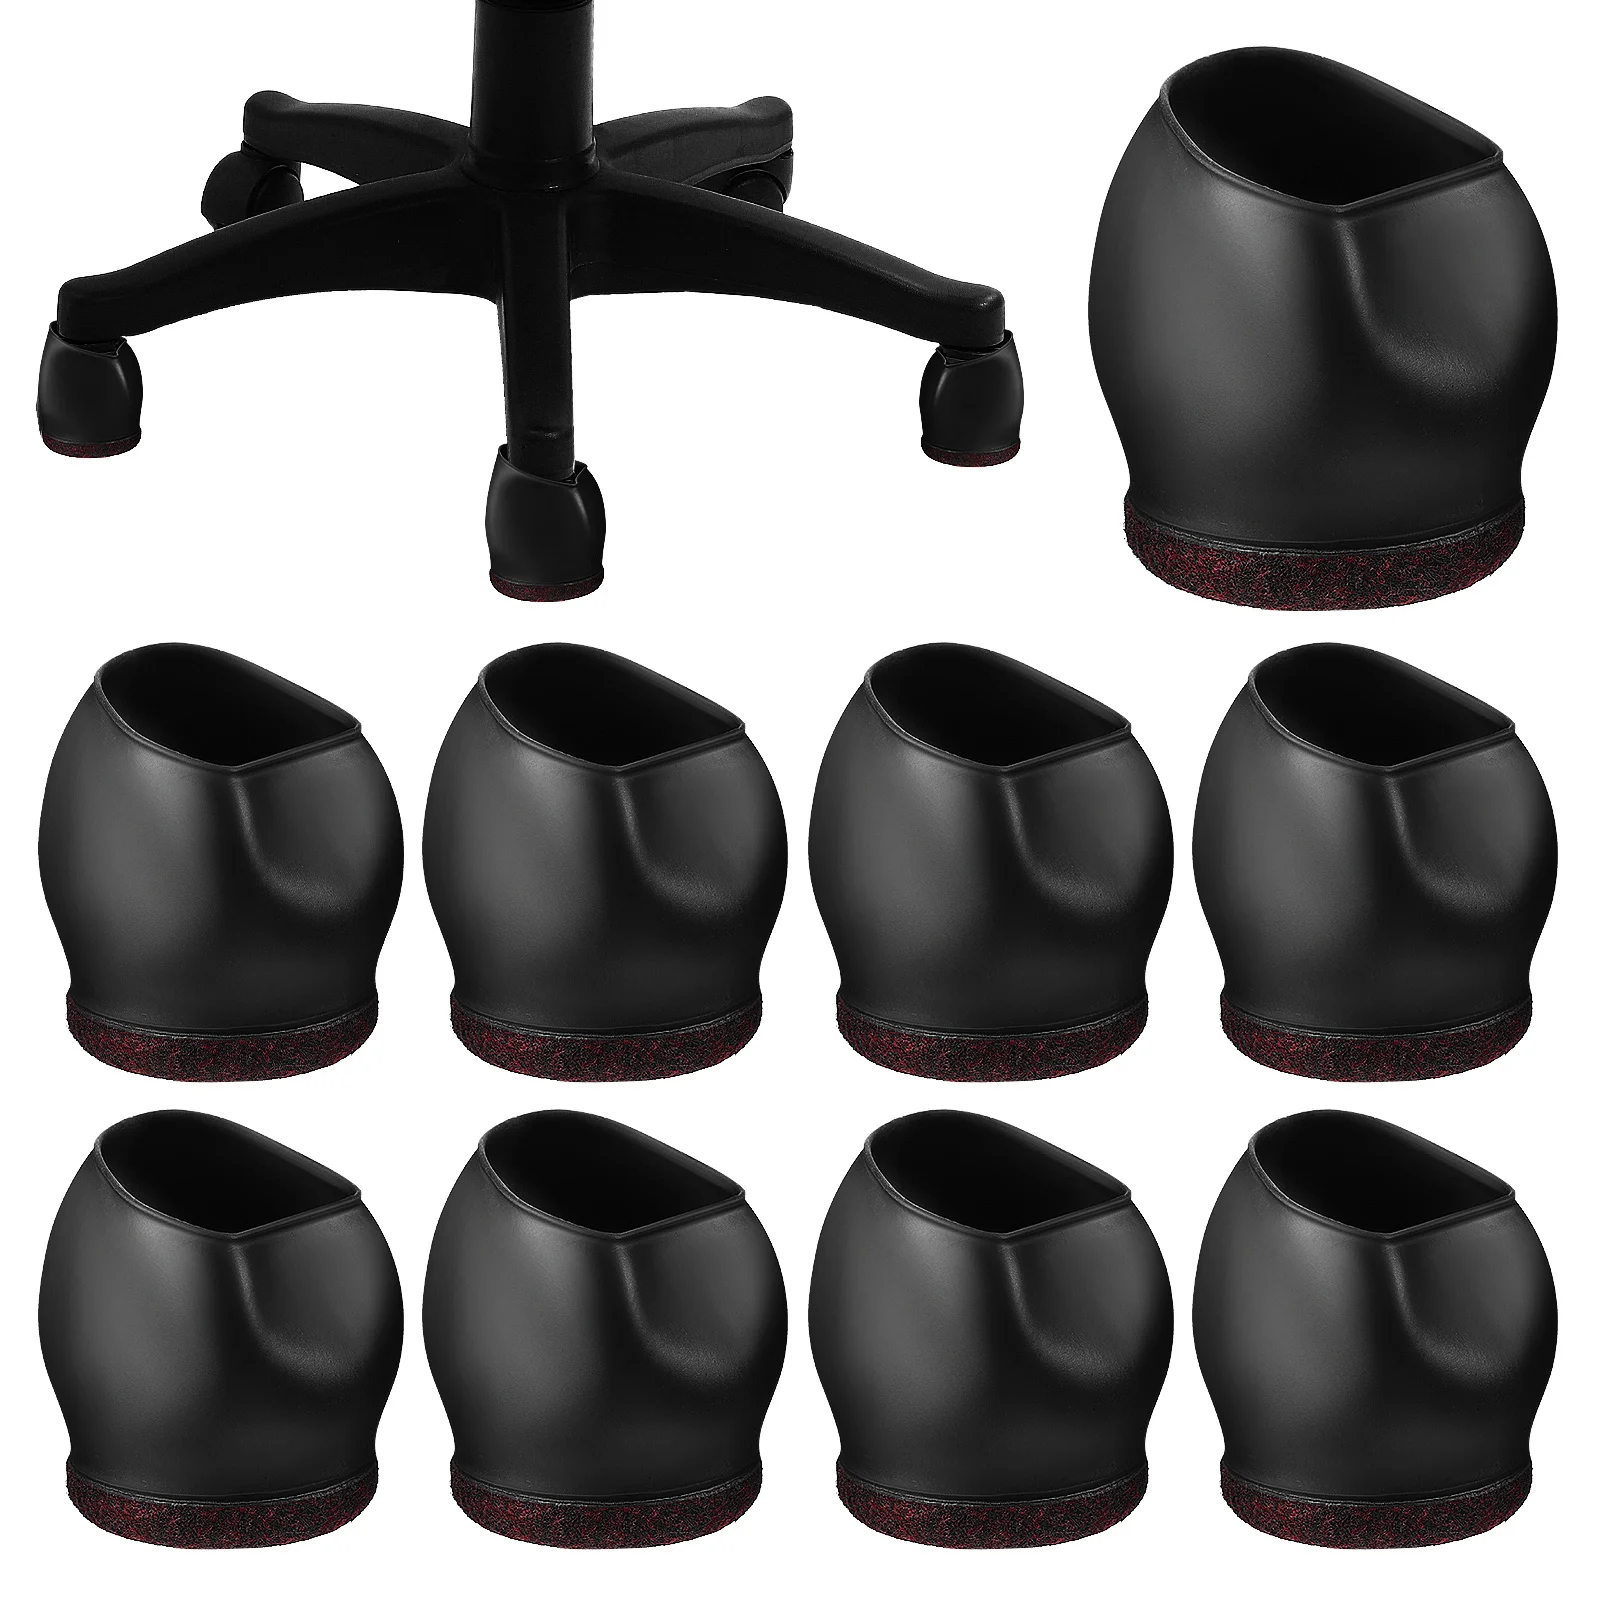 

10 Pcs Office Chair Wheel Stopper Caster Cups Stoppers Rolling Chairs Pulley Carpet Tpe Desk Dining Room Covers